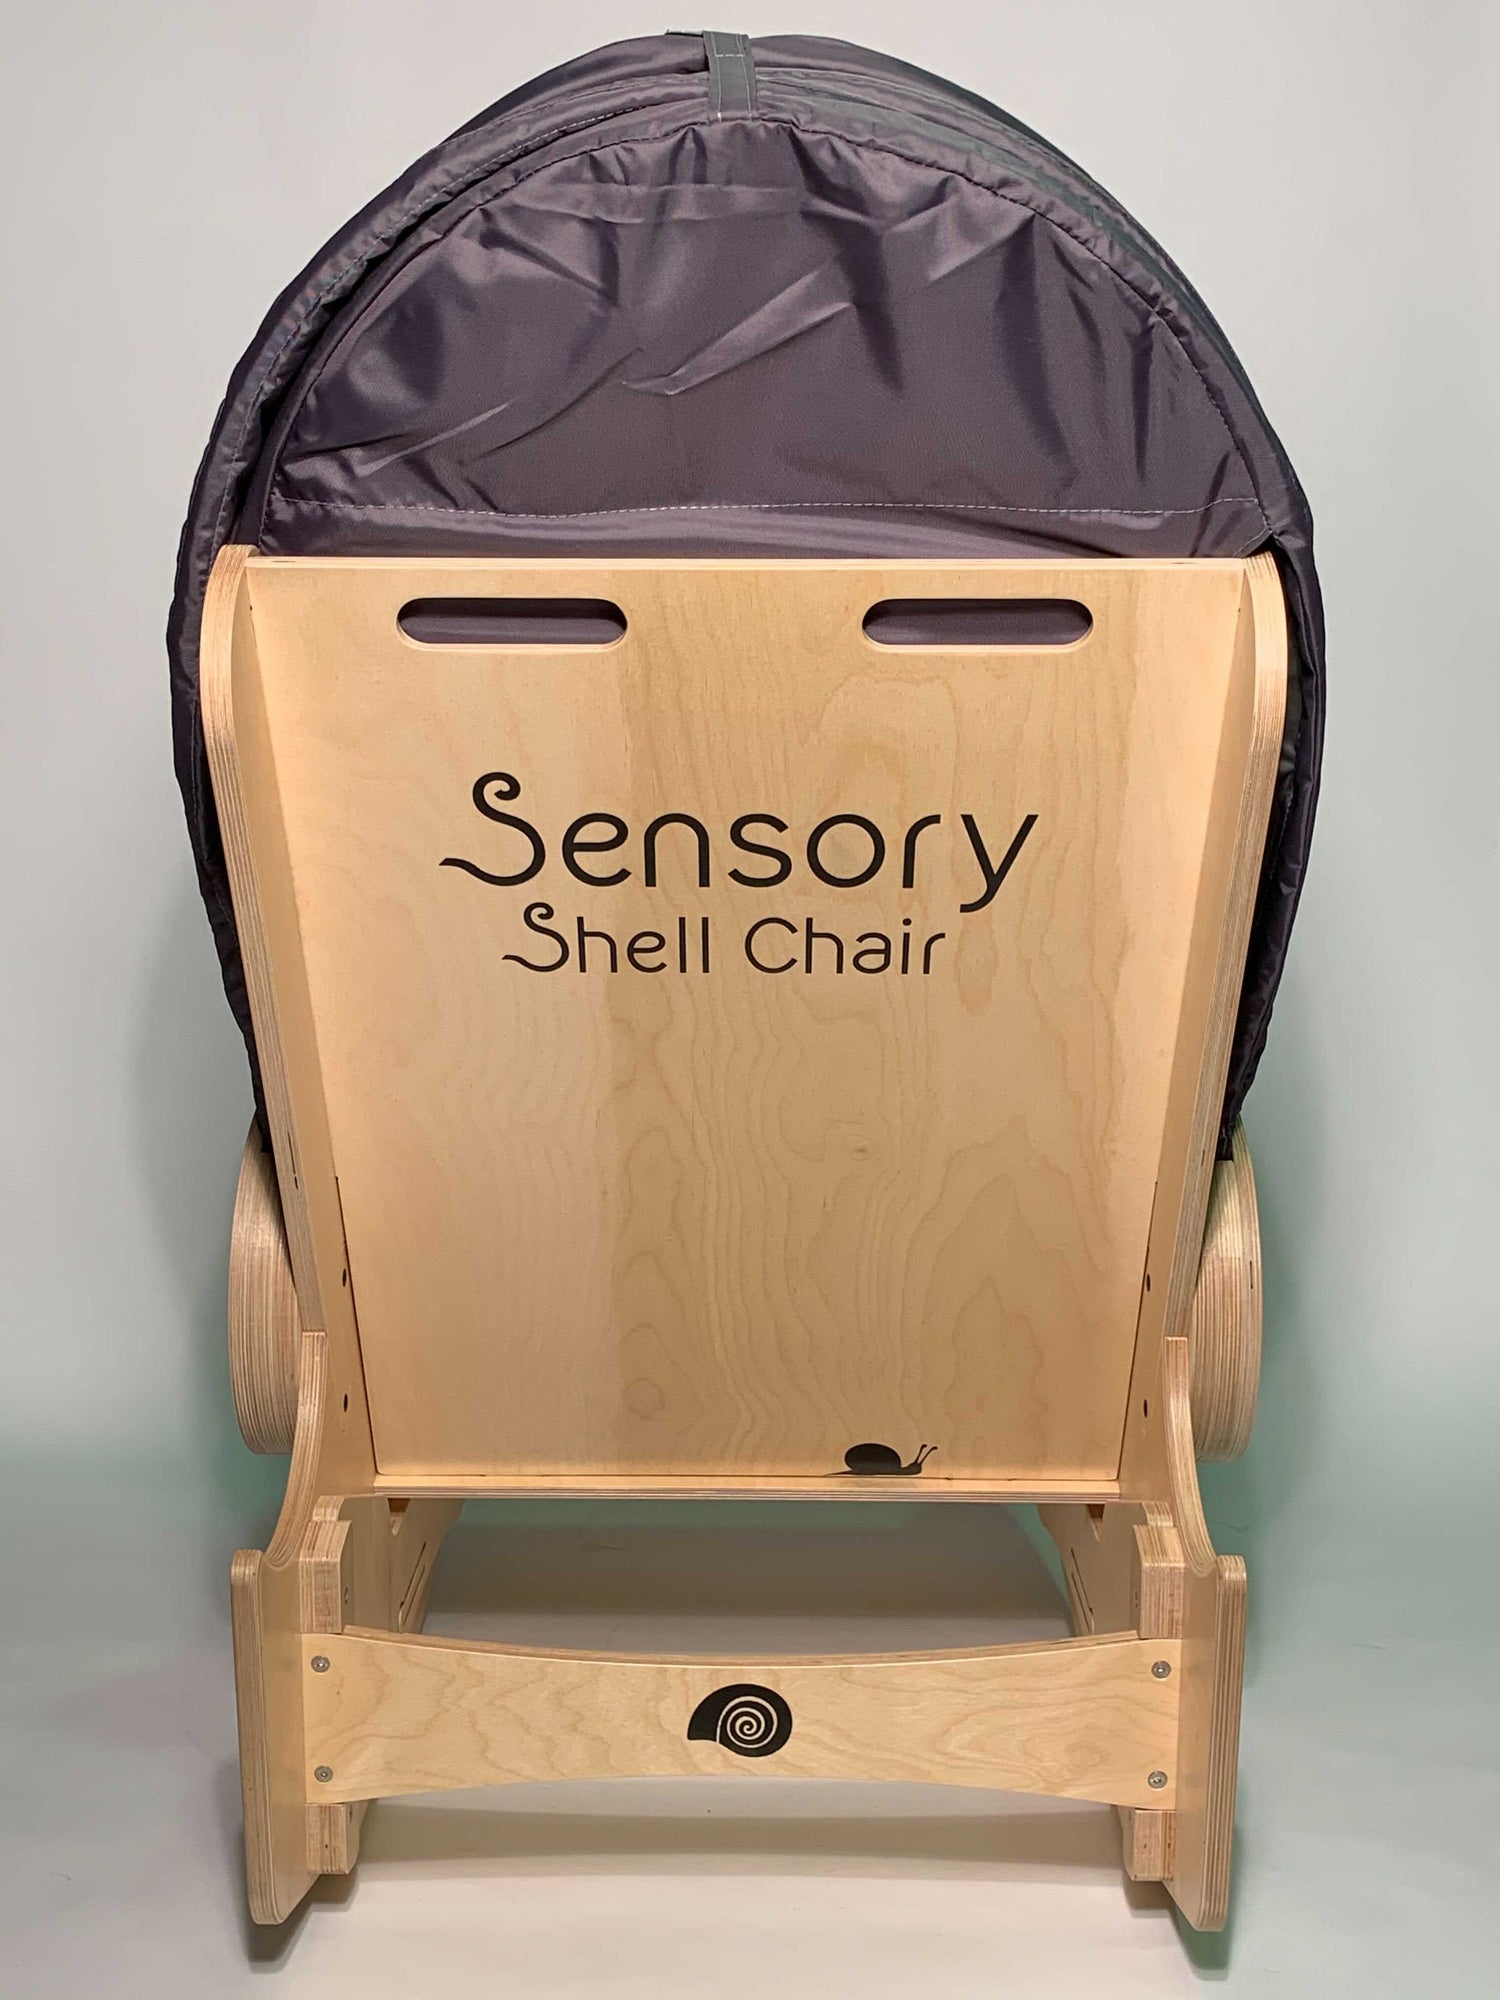 Back view of sensory shell chair showing handles and foot rocker